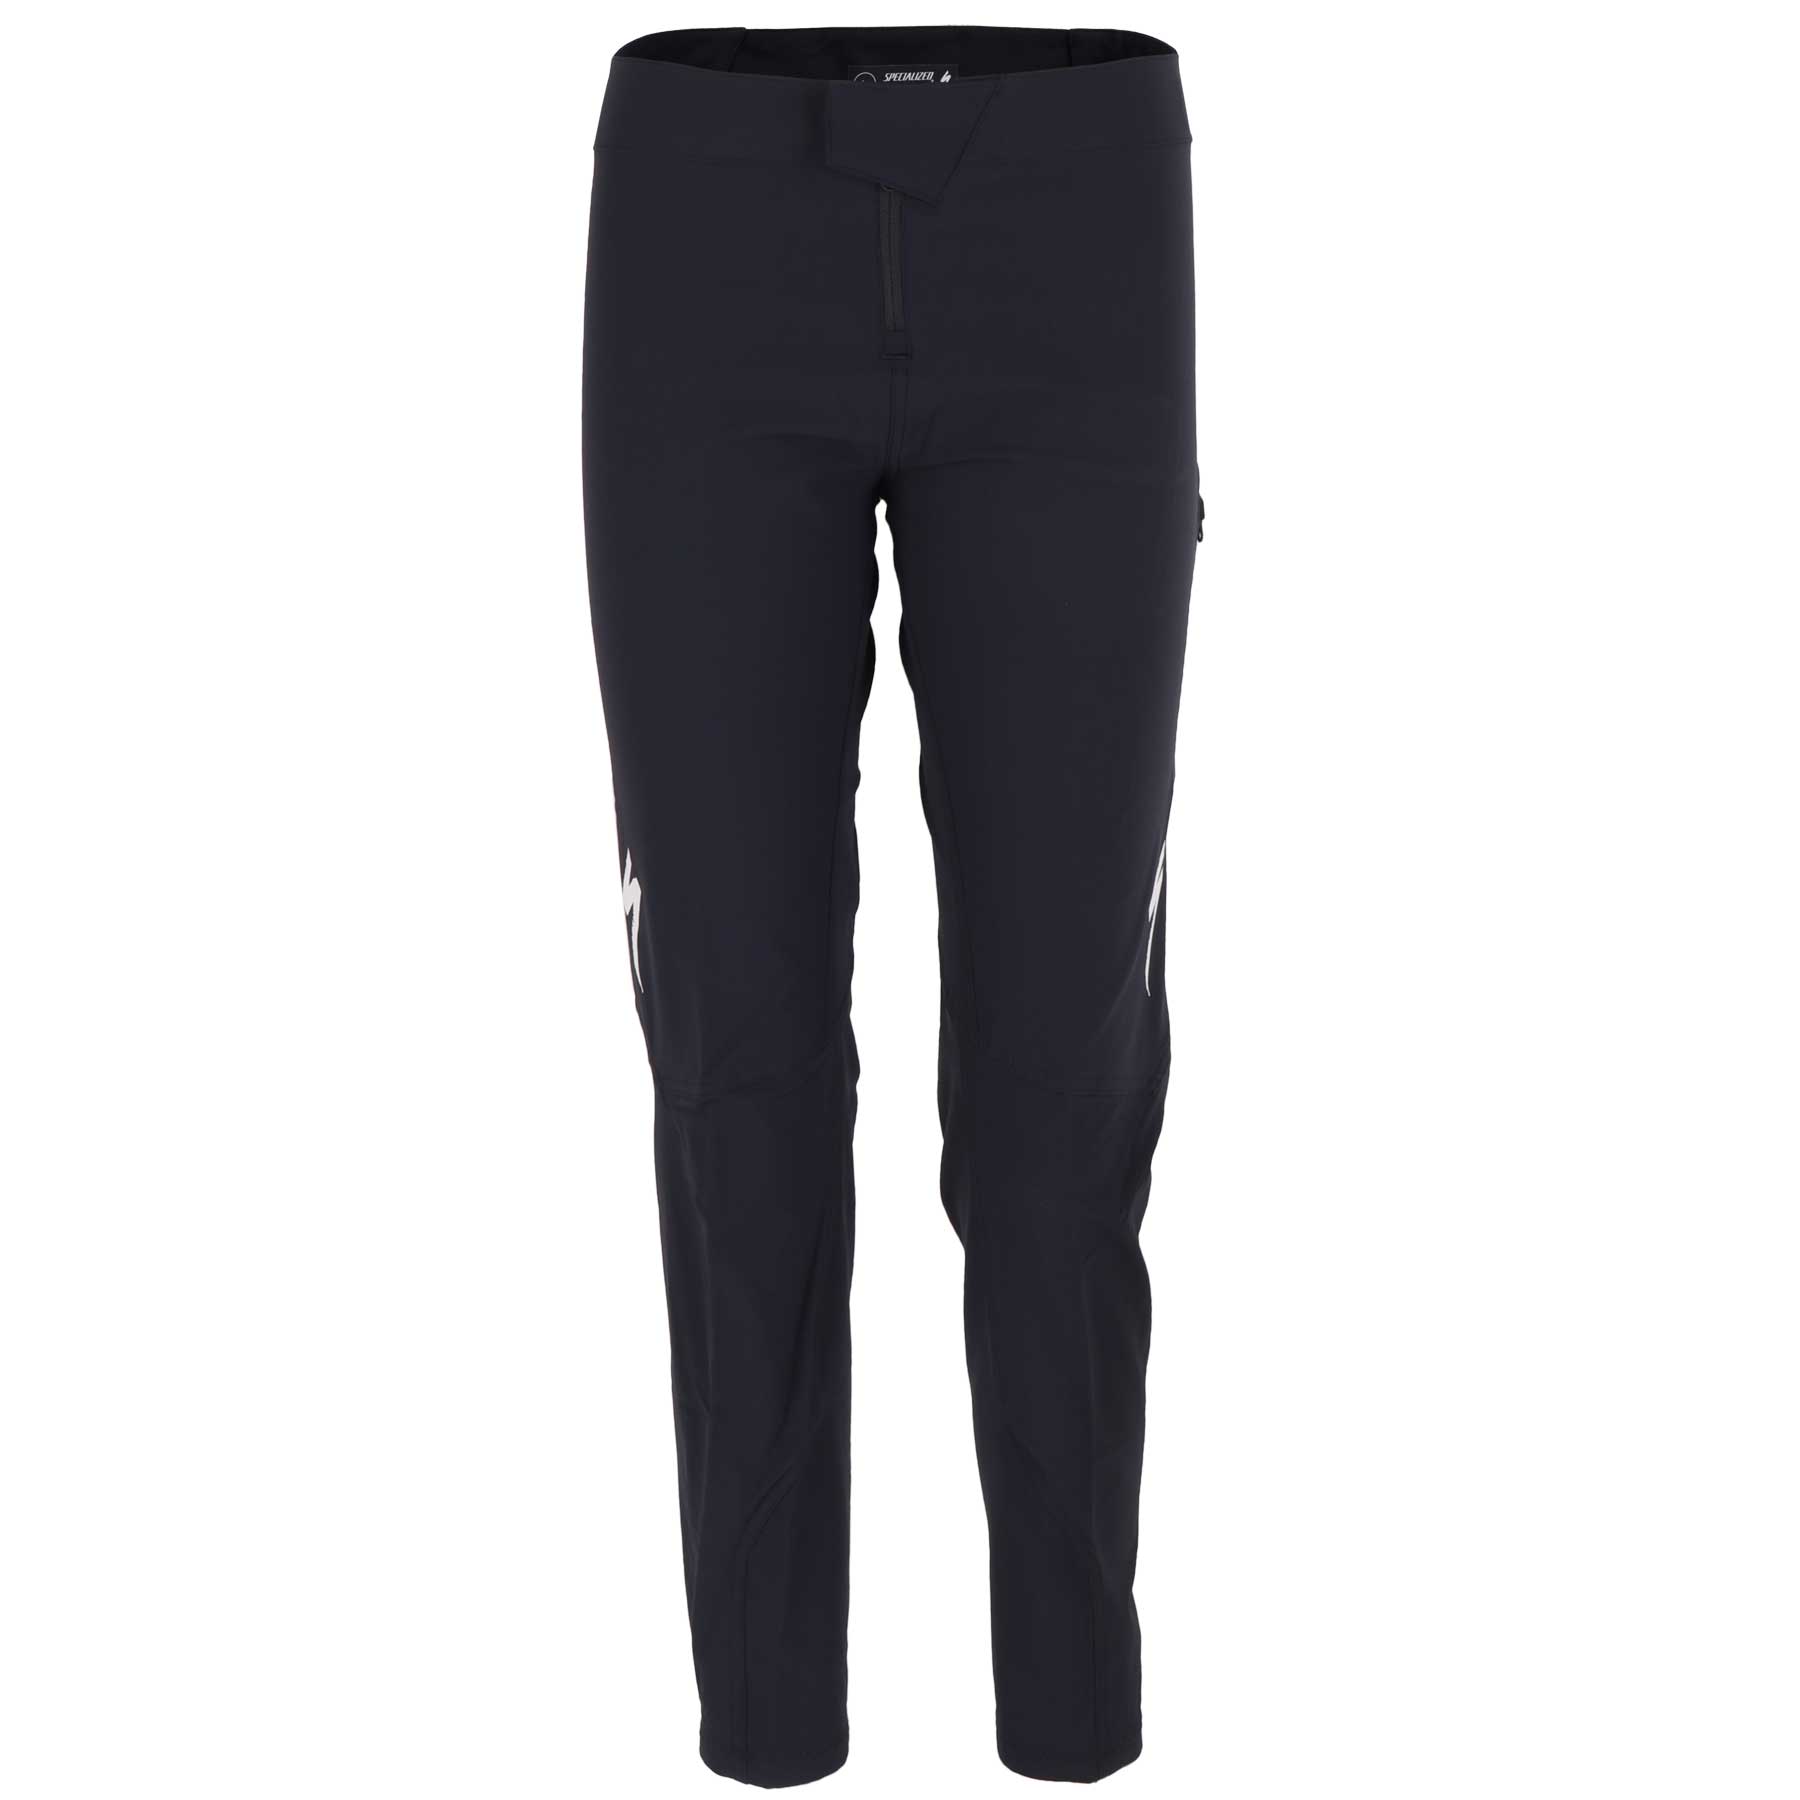 Image of Specialized Trail Pants Kids - black